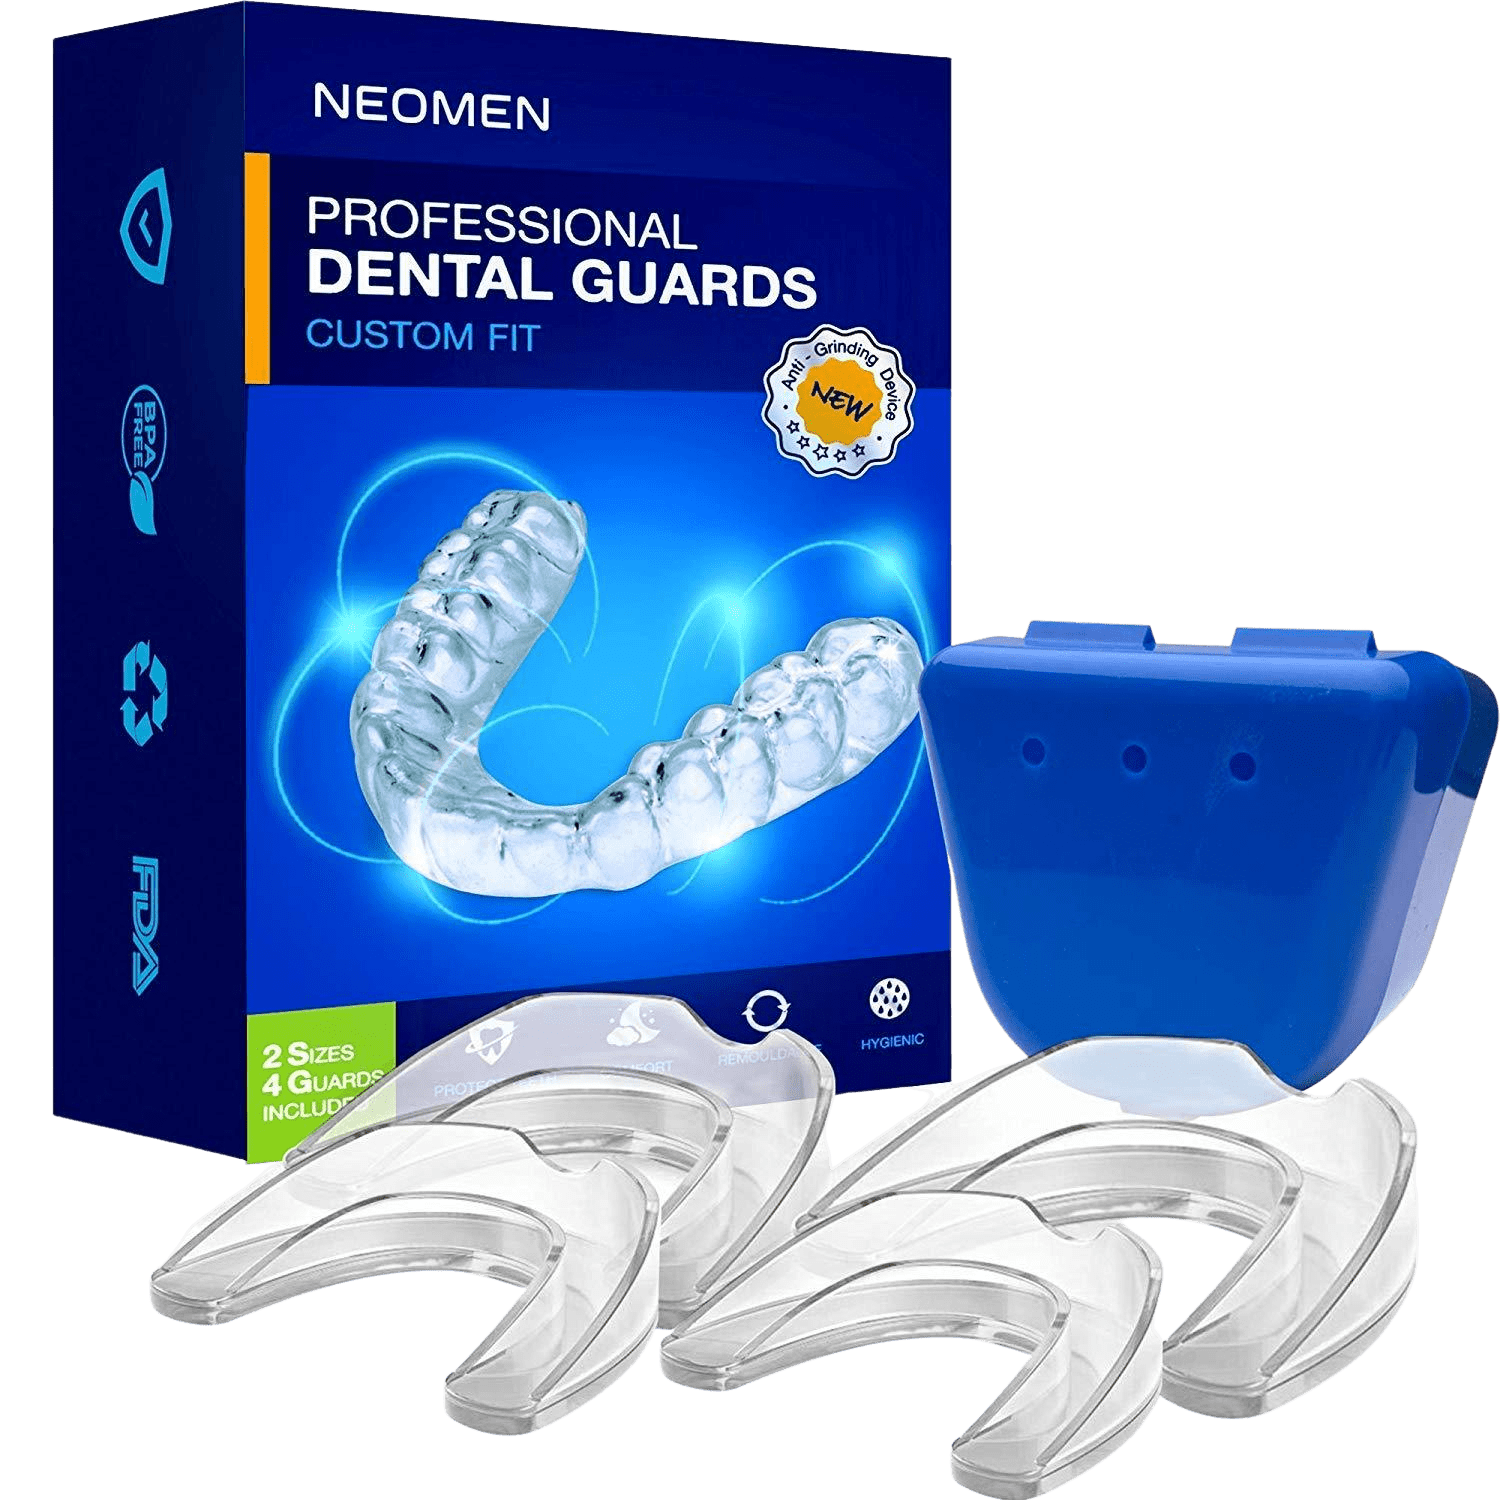 Neomen Mouth Guards for Teeth Grinding 2 Sizes, Pack of 4, Custom Fit Professional Dental Guard, New Upgraded Teeth Grinding Guard, Stops Bruxism | Decor Gifts and More